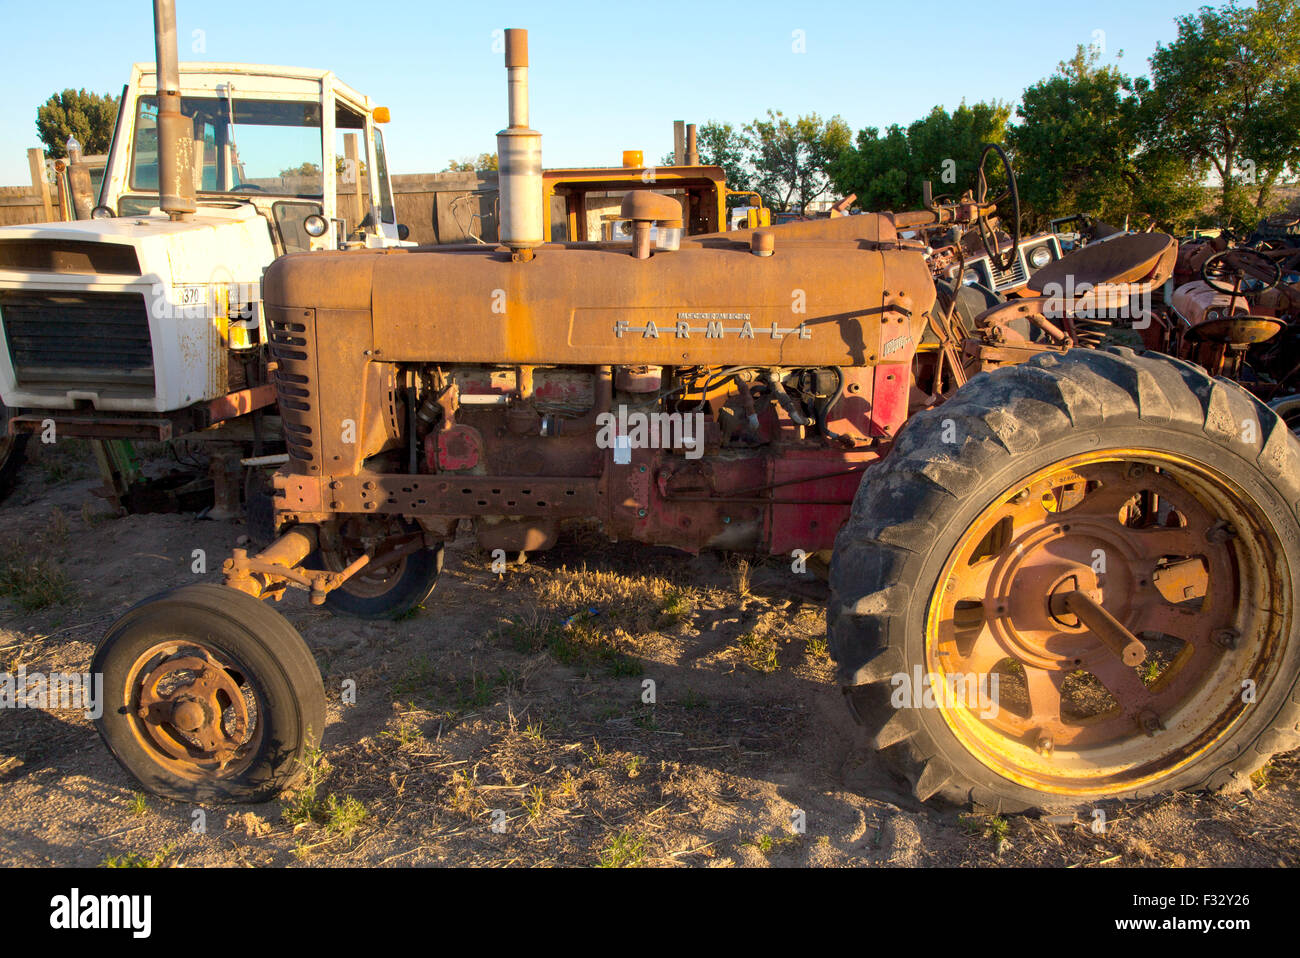 Rusted Farmall farm tractor in junkyard at sunset,US, 2015. Stock Photo